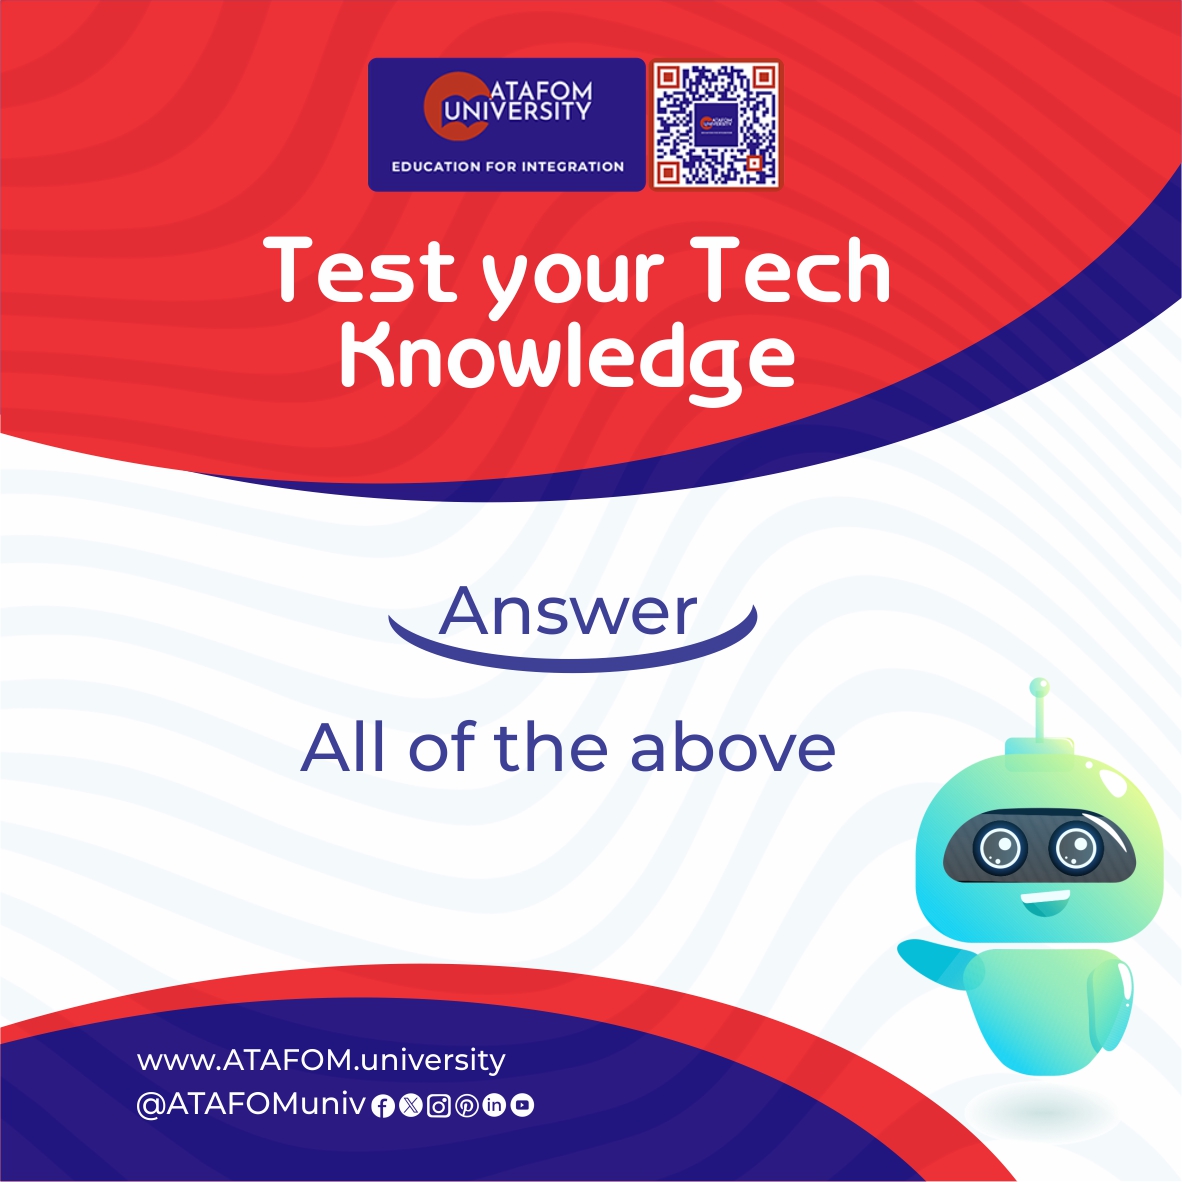 Can you crack our latest tech challenge? 

Put your wits to the test and enhance your skills with ATAFOM University.

#TechTest #MindChallenge #Tech #CriticalThinking #Test #UniversityLife #ATAFOMonlinecampus #Learning #Education #Student  #bachelorcourses #education #university